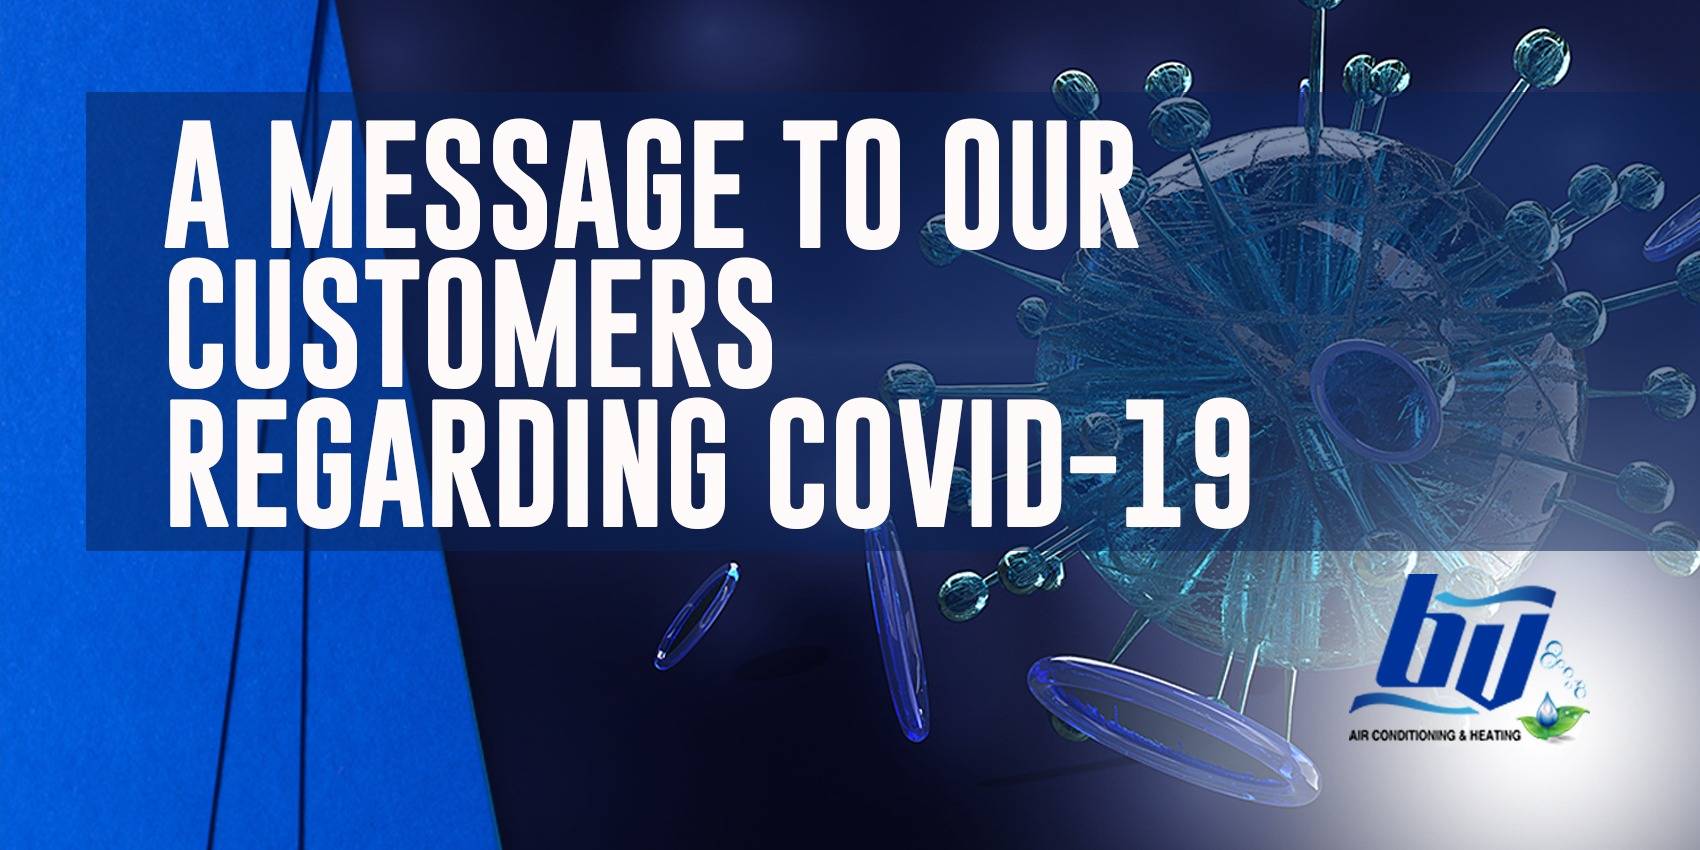 A MESSAGE TO OUR CUSTOMERS REGARDING COVID-19